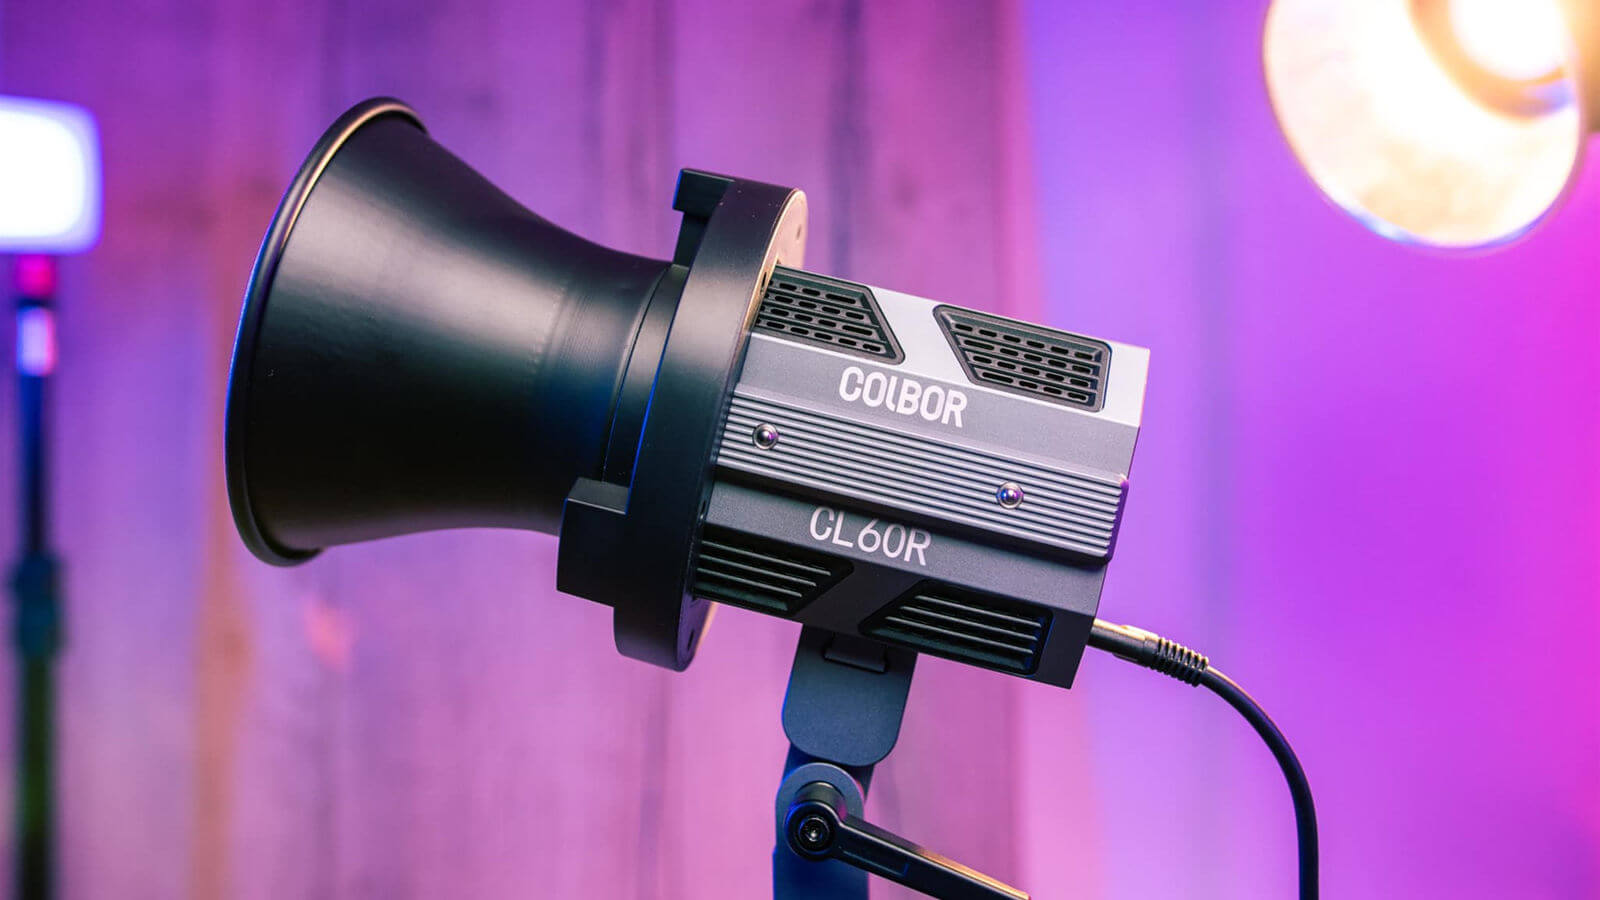 COLBOR CL60R can create purple lighting for filming YouTube videos.